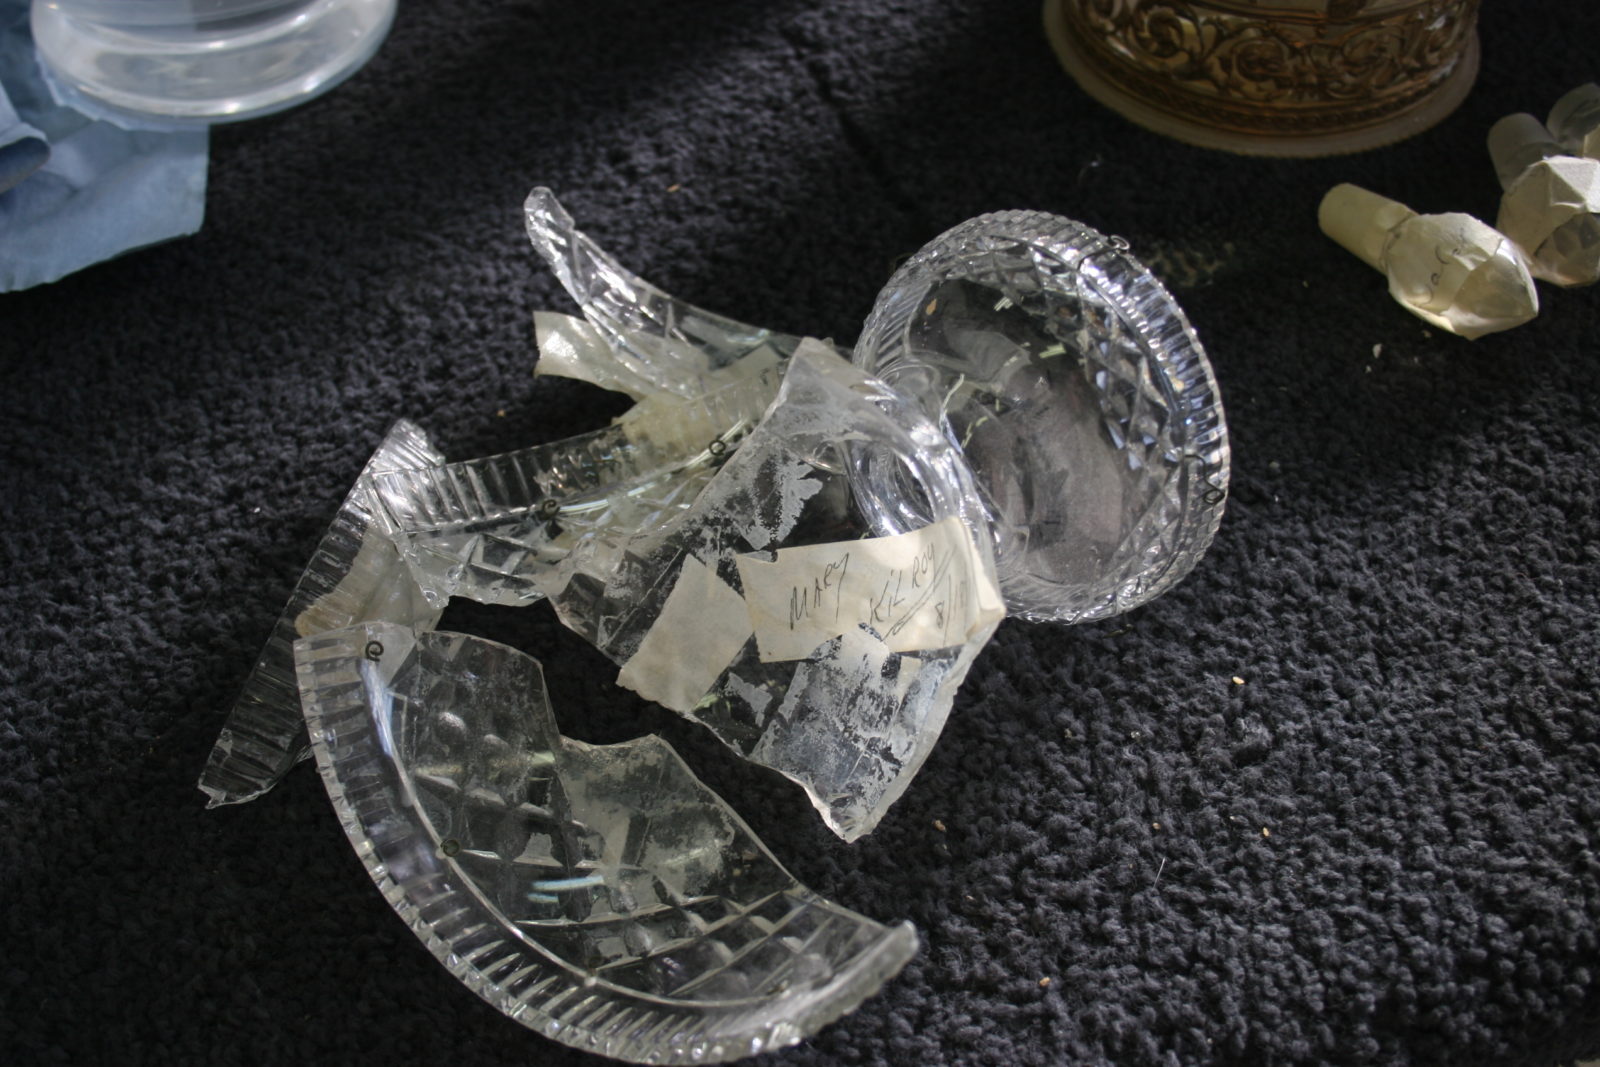 I Broke A Crystal Glass And It Is In Pieces. How Can I Repurpose It?